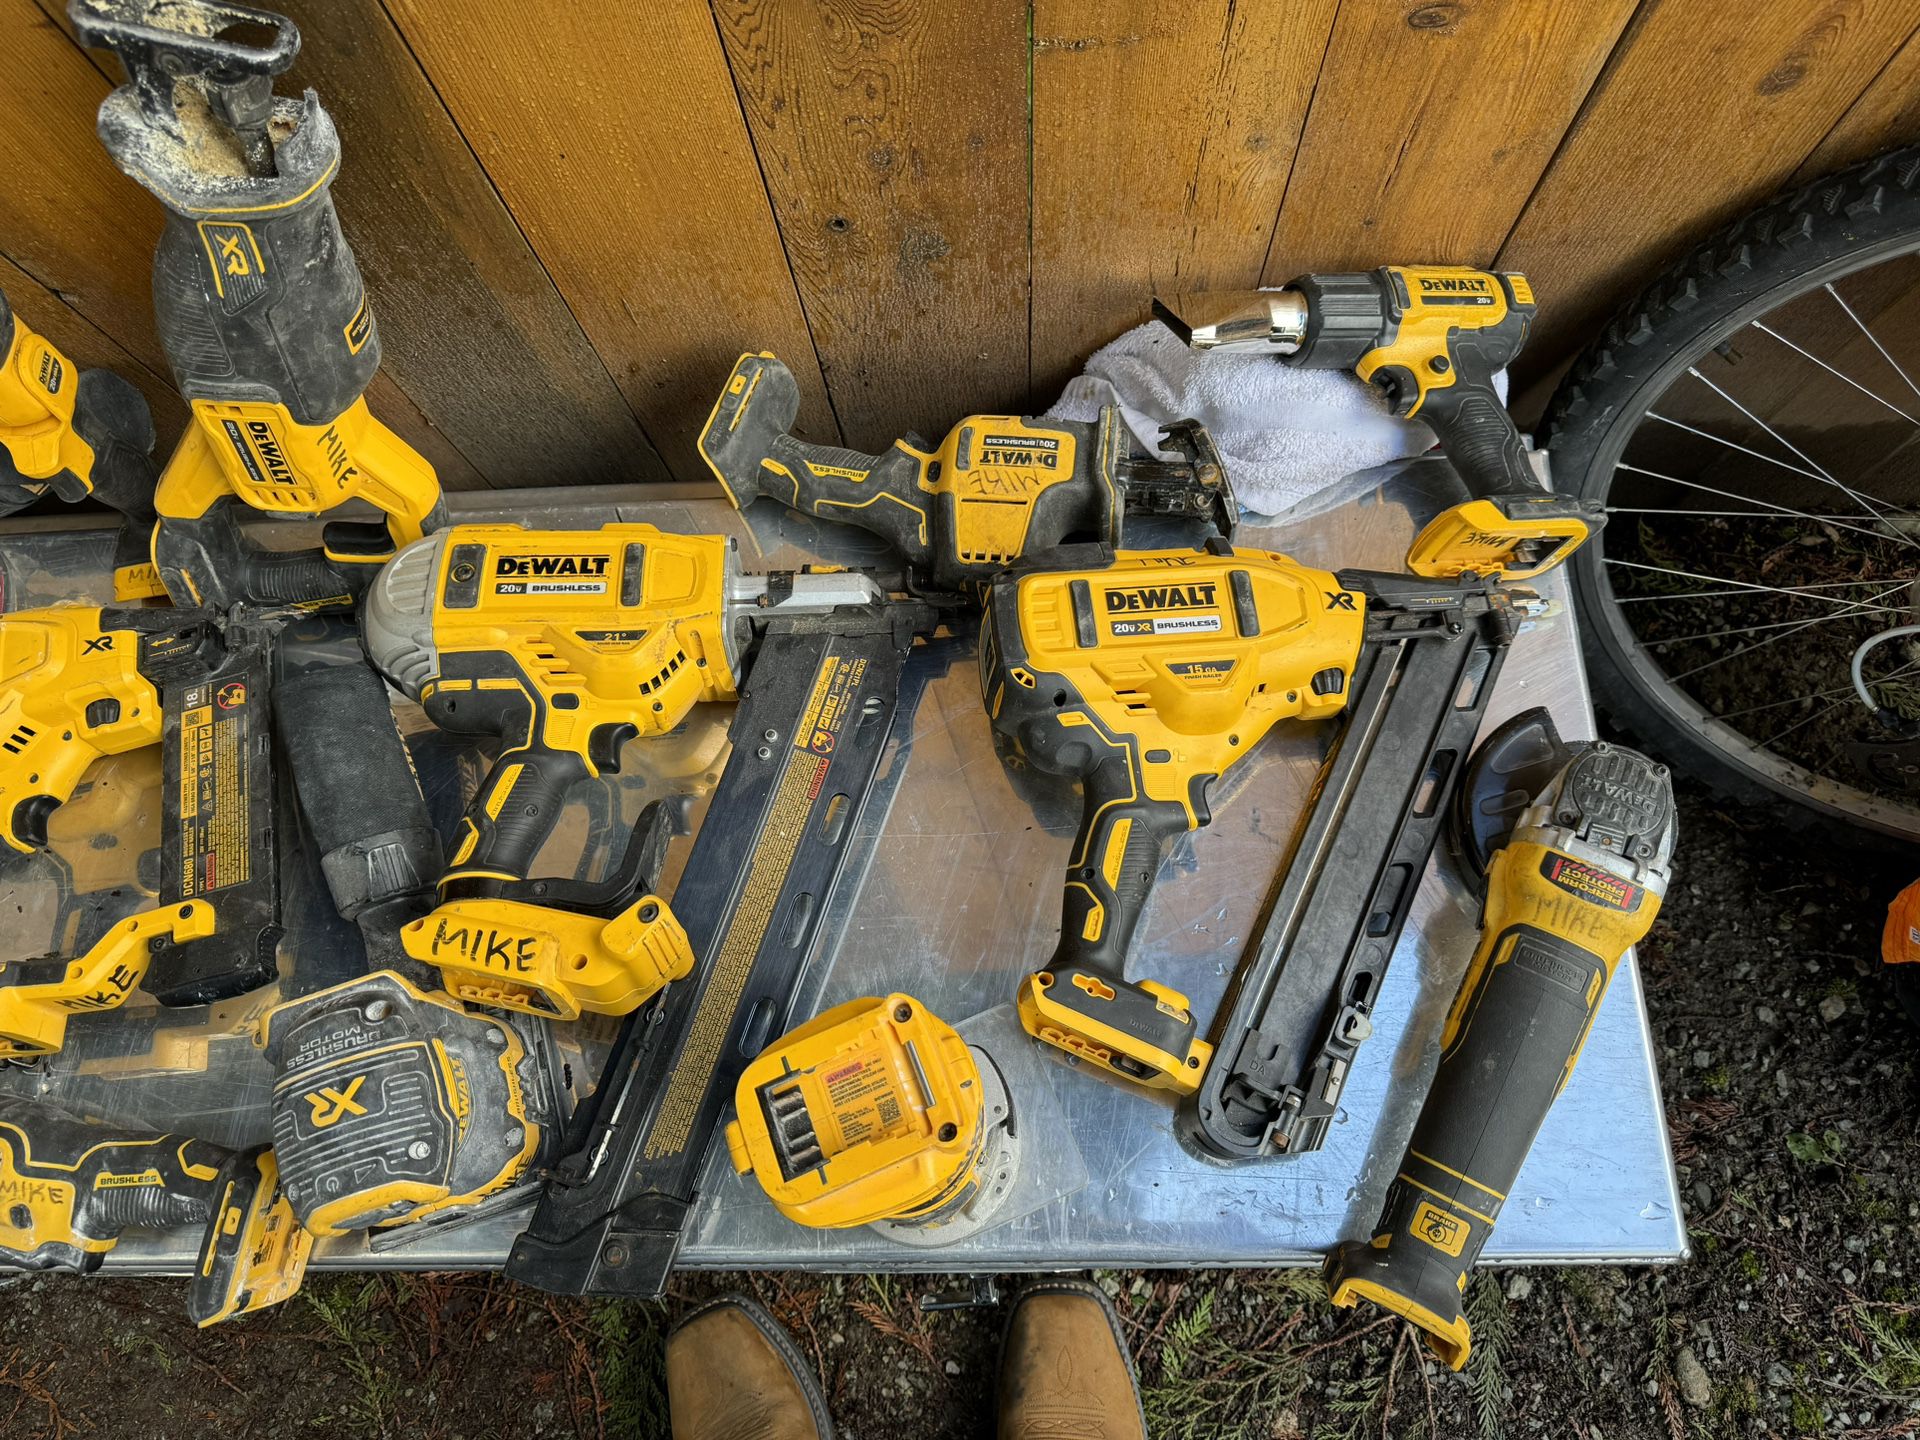 Dewalt XR 20volt To 60 Volt Tools All In Great Shape With Battery’s And Chargers Laser Levels And Lots More 